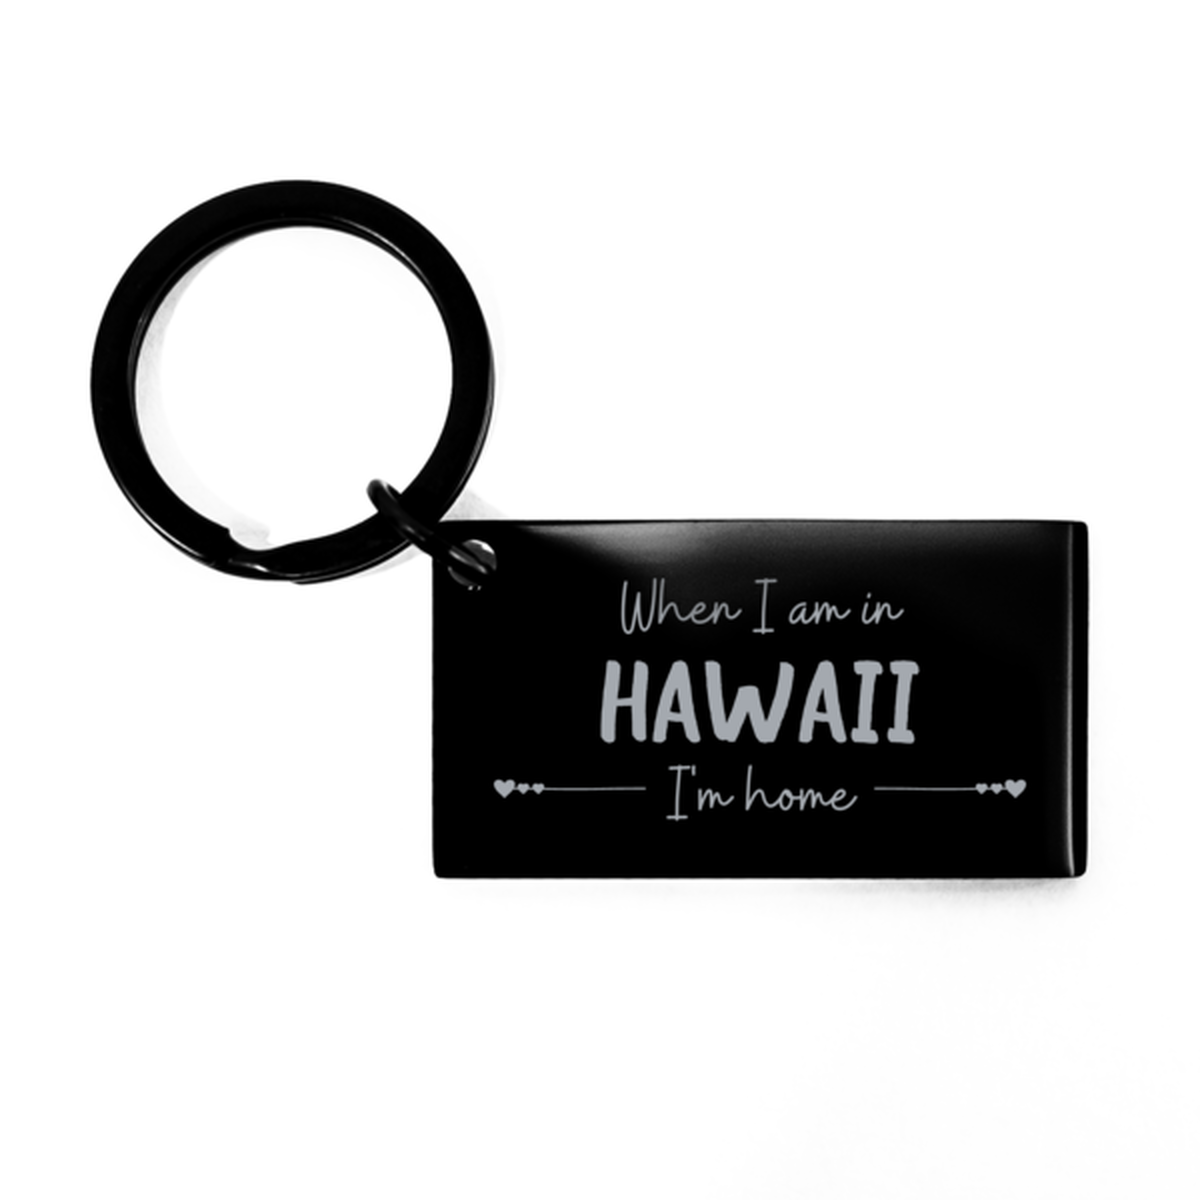 When I am in Hawaii I'm home Keychain, Cheap Gifts For Hawaii, State Hawaii Birthday Gifts for Friends Coworker